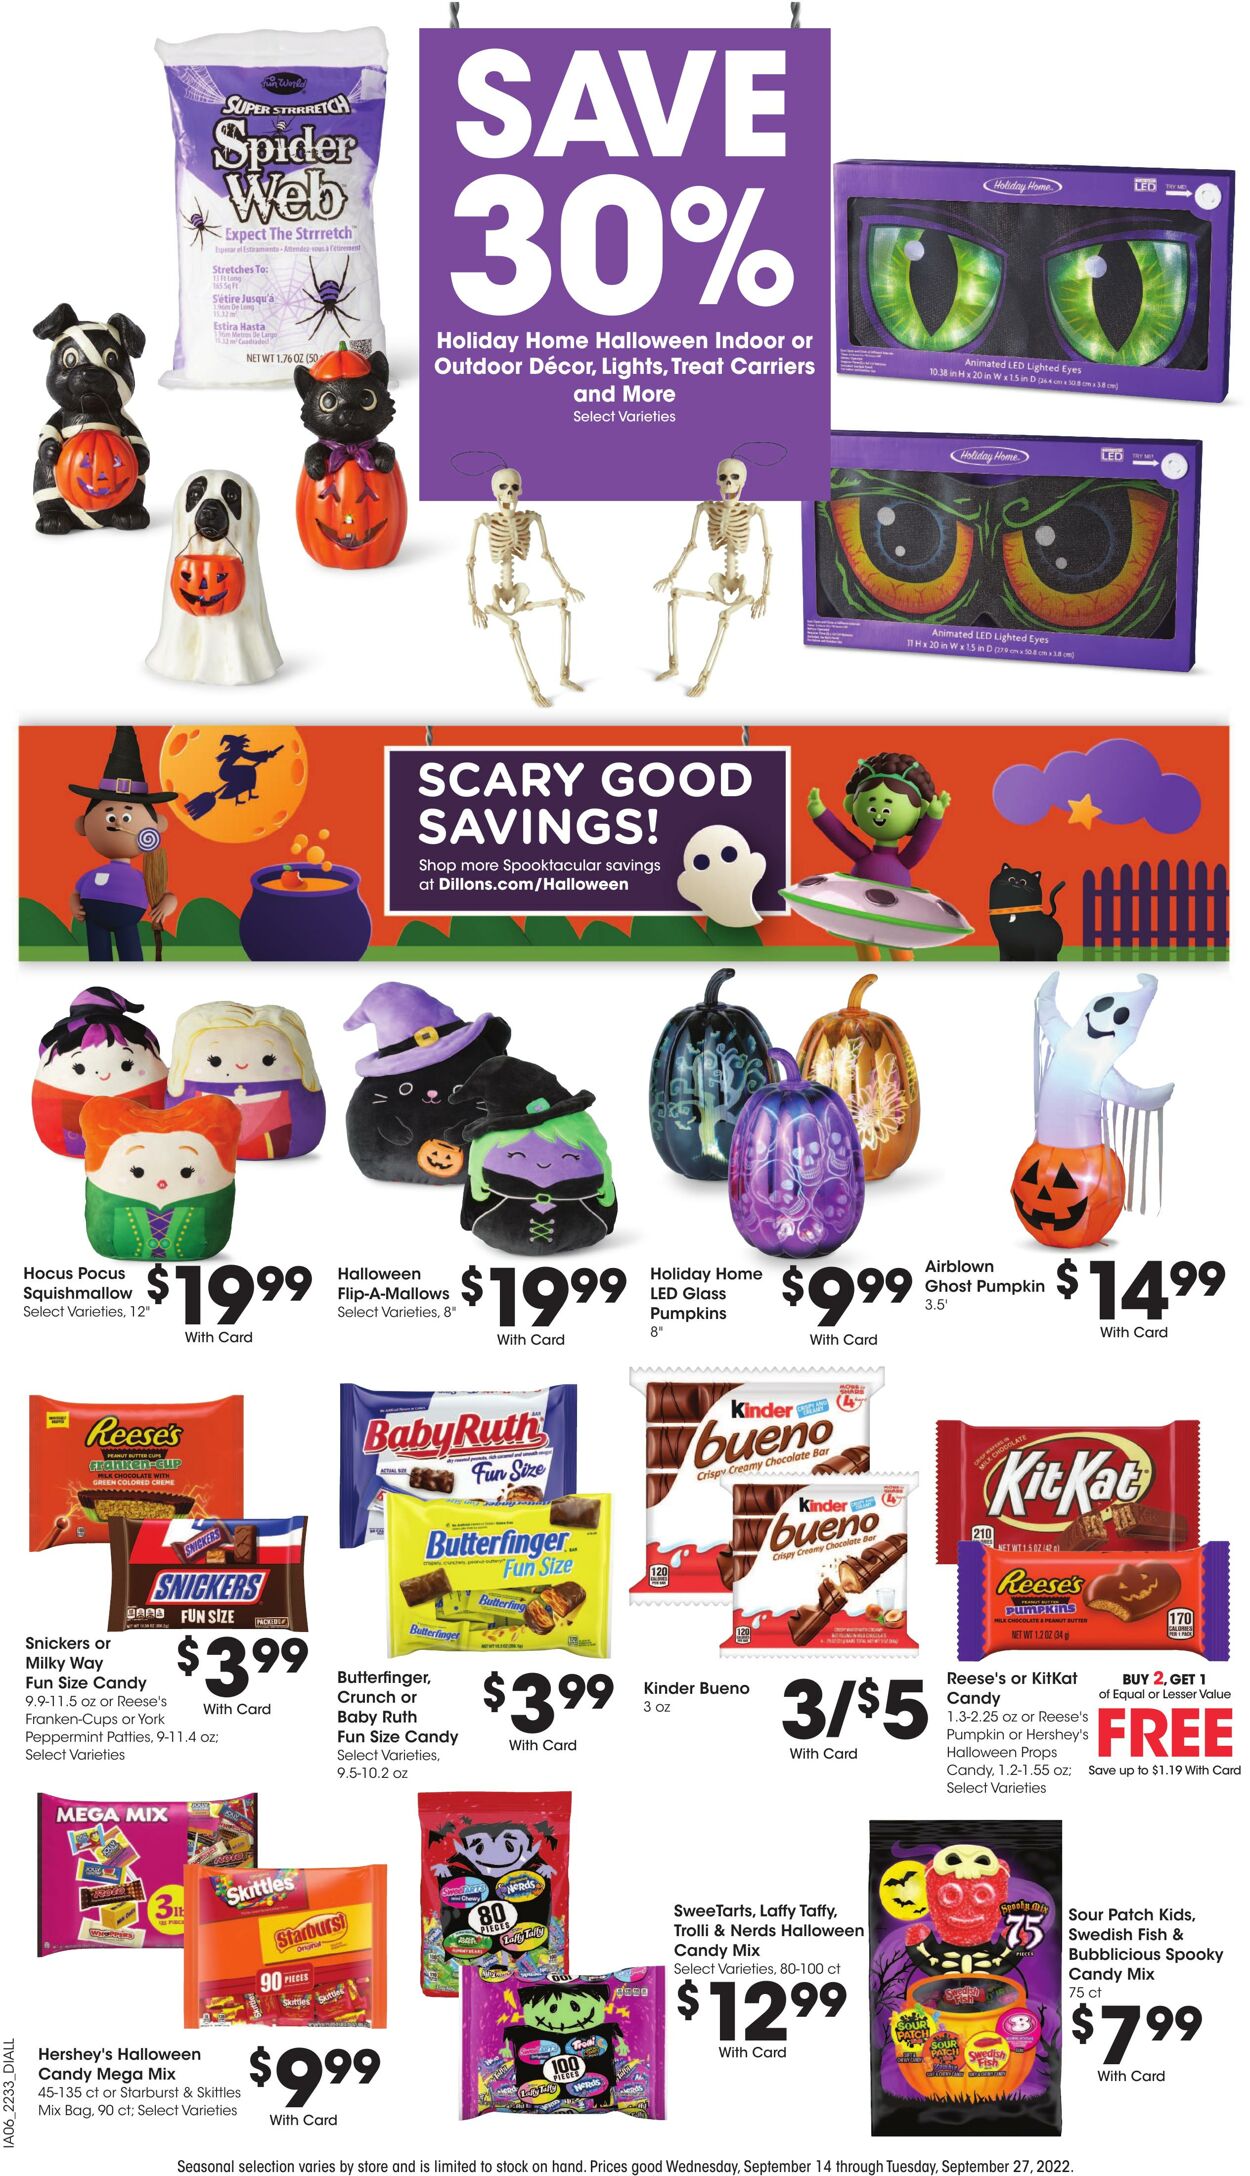 Weekly ad Dillons 09/21/2022 - 09/27/2022